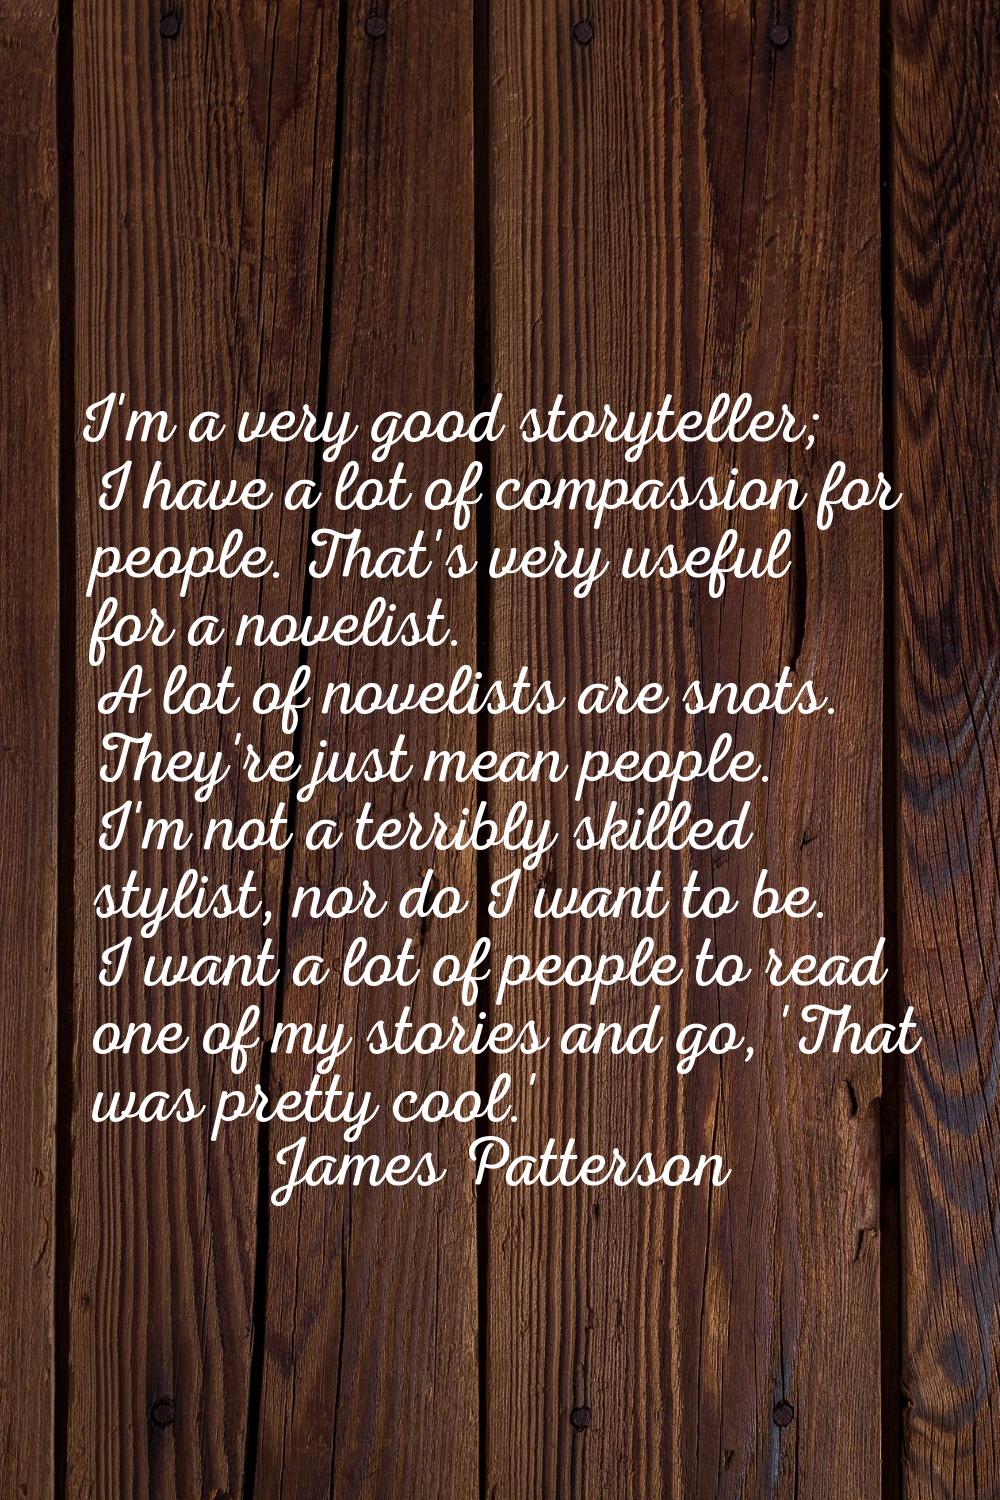 I'm a very good storyteller; I have a lot of compassion for people. That's very useful for a noveli